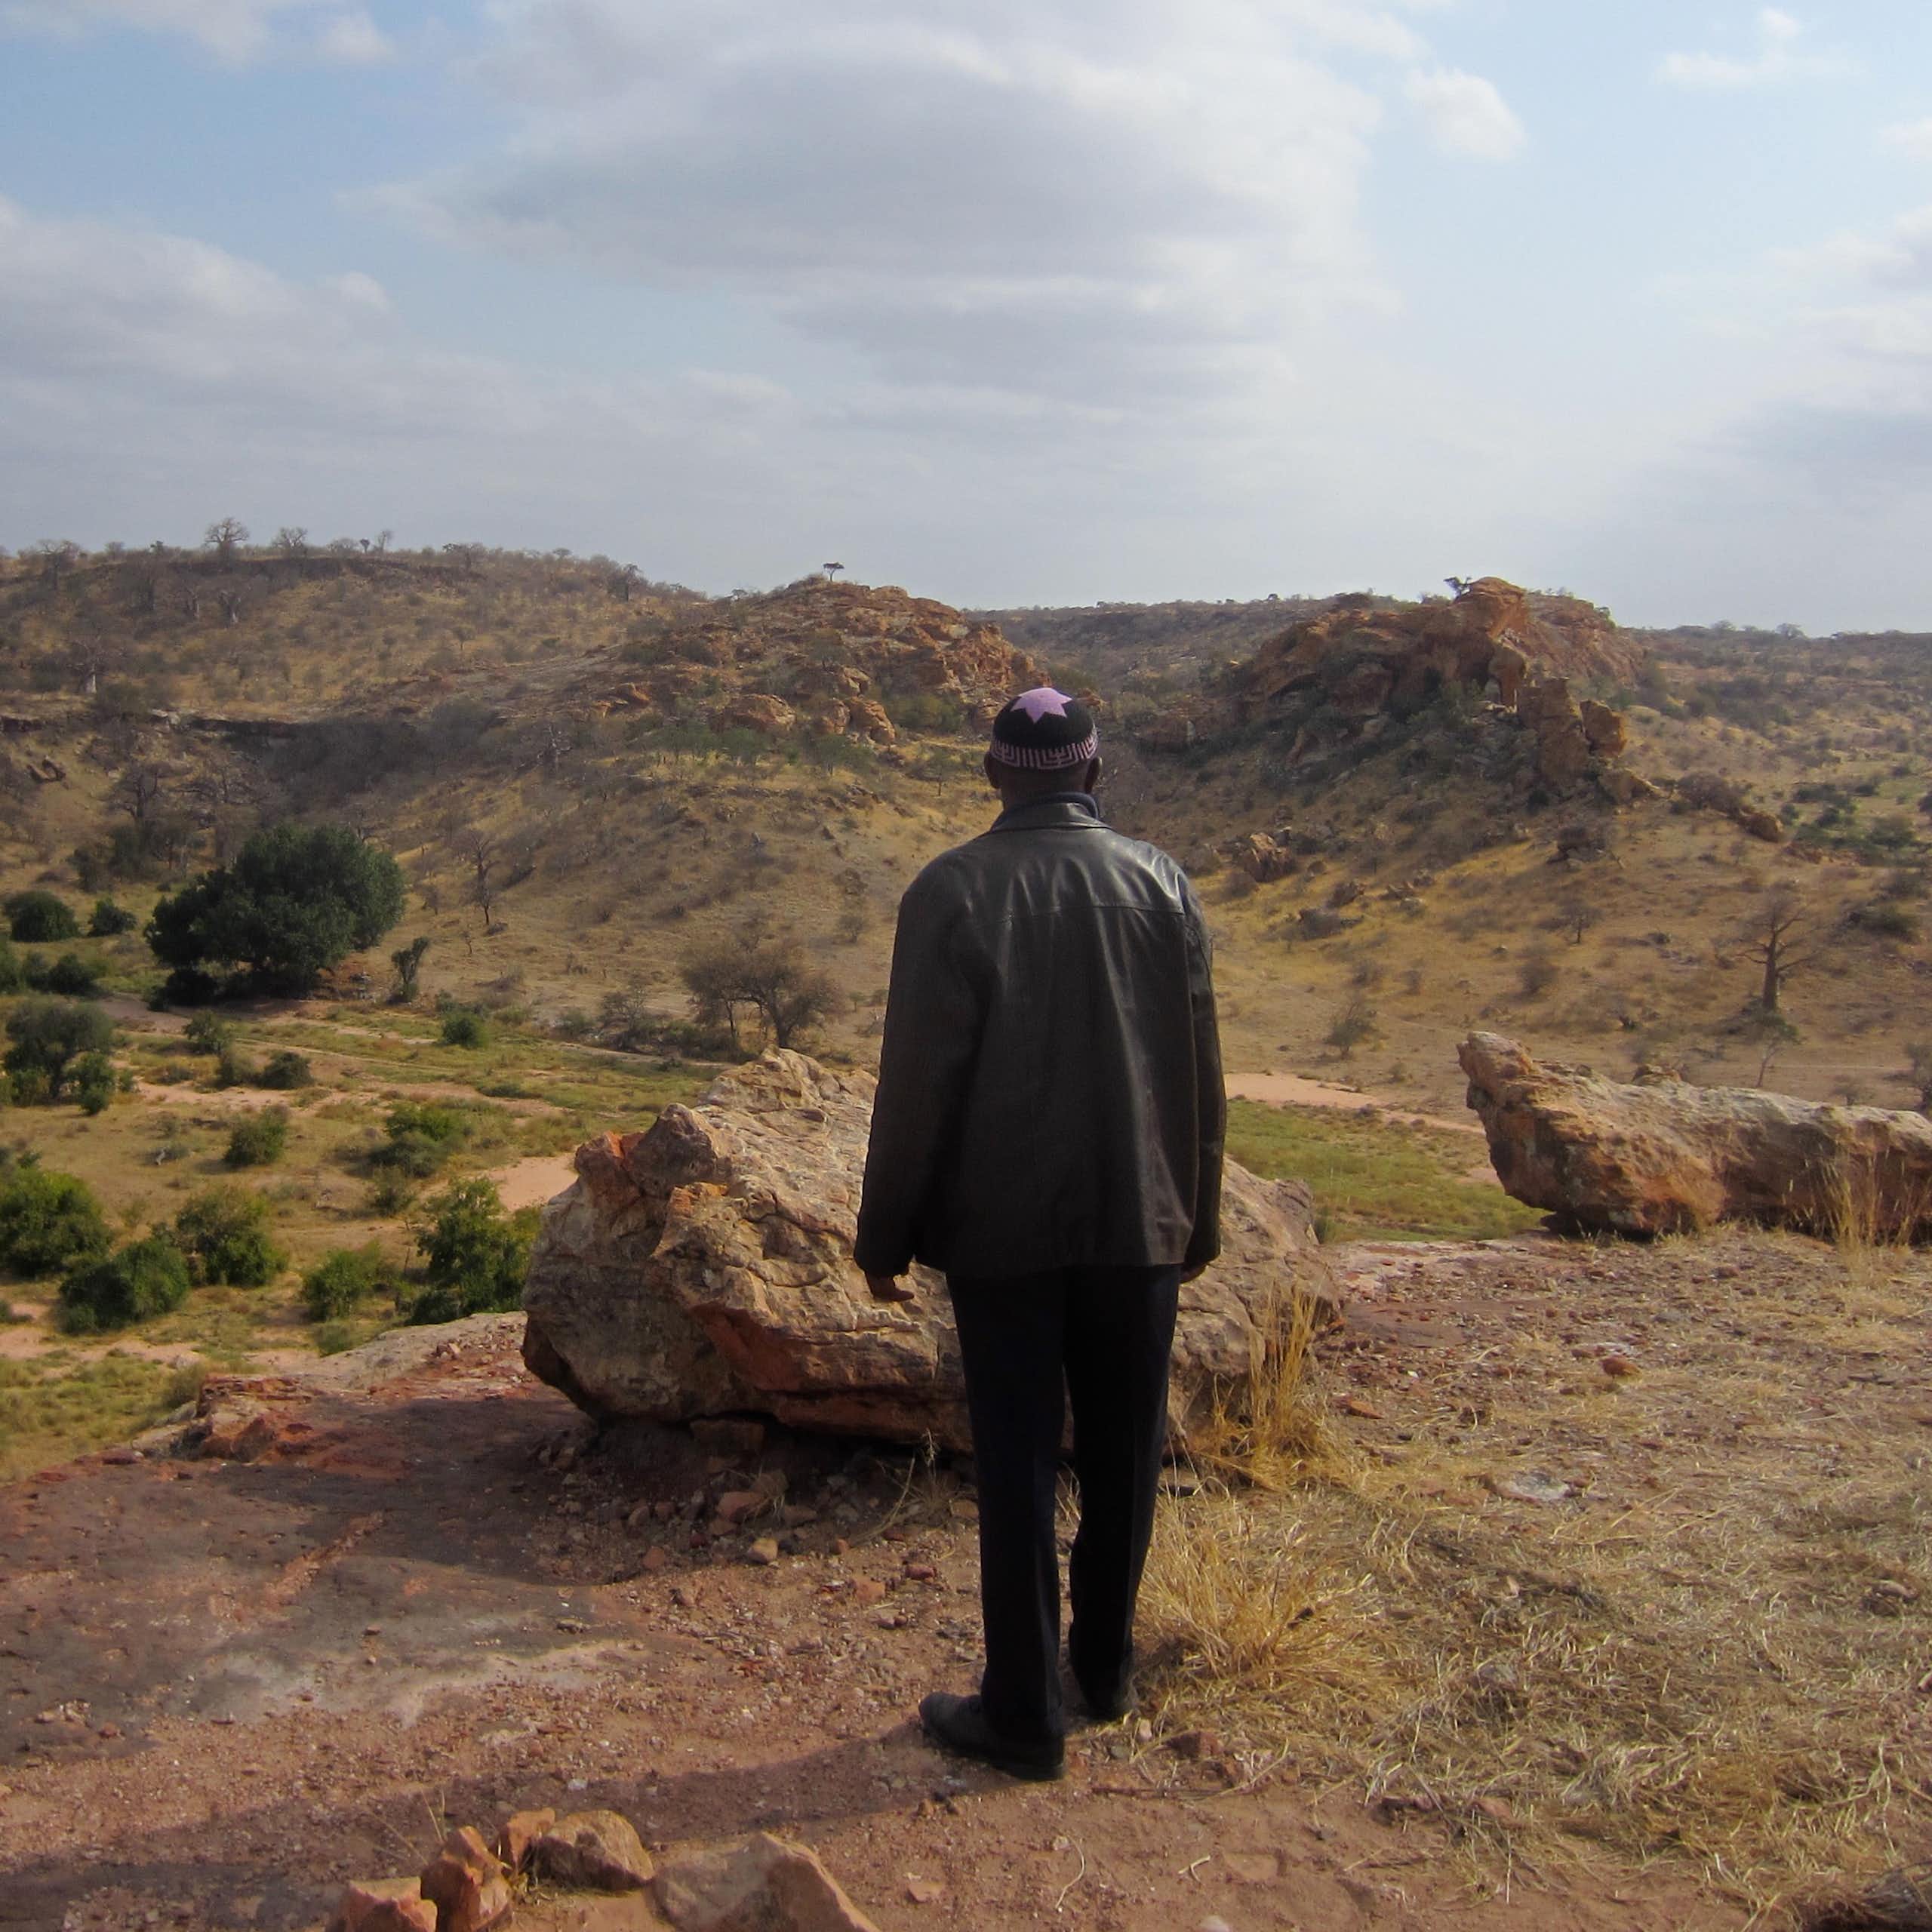 A man wearing black clothes and a yarmulke looks out across a mountainous landscape